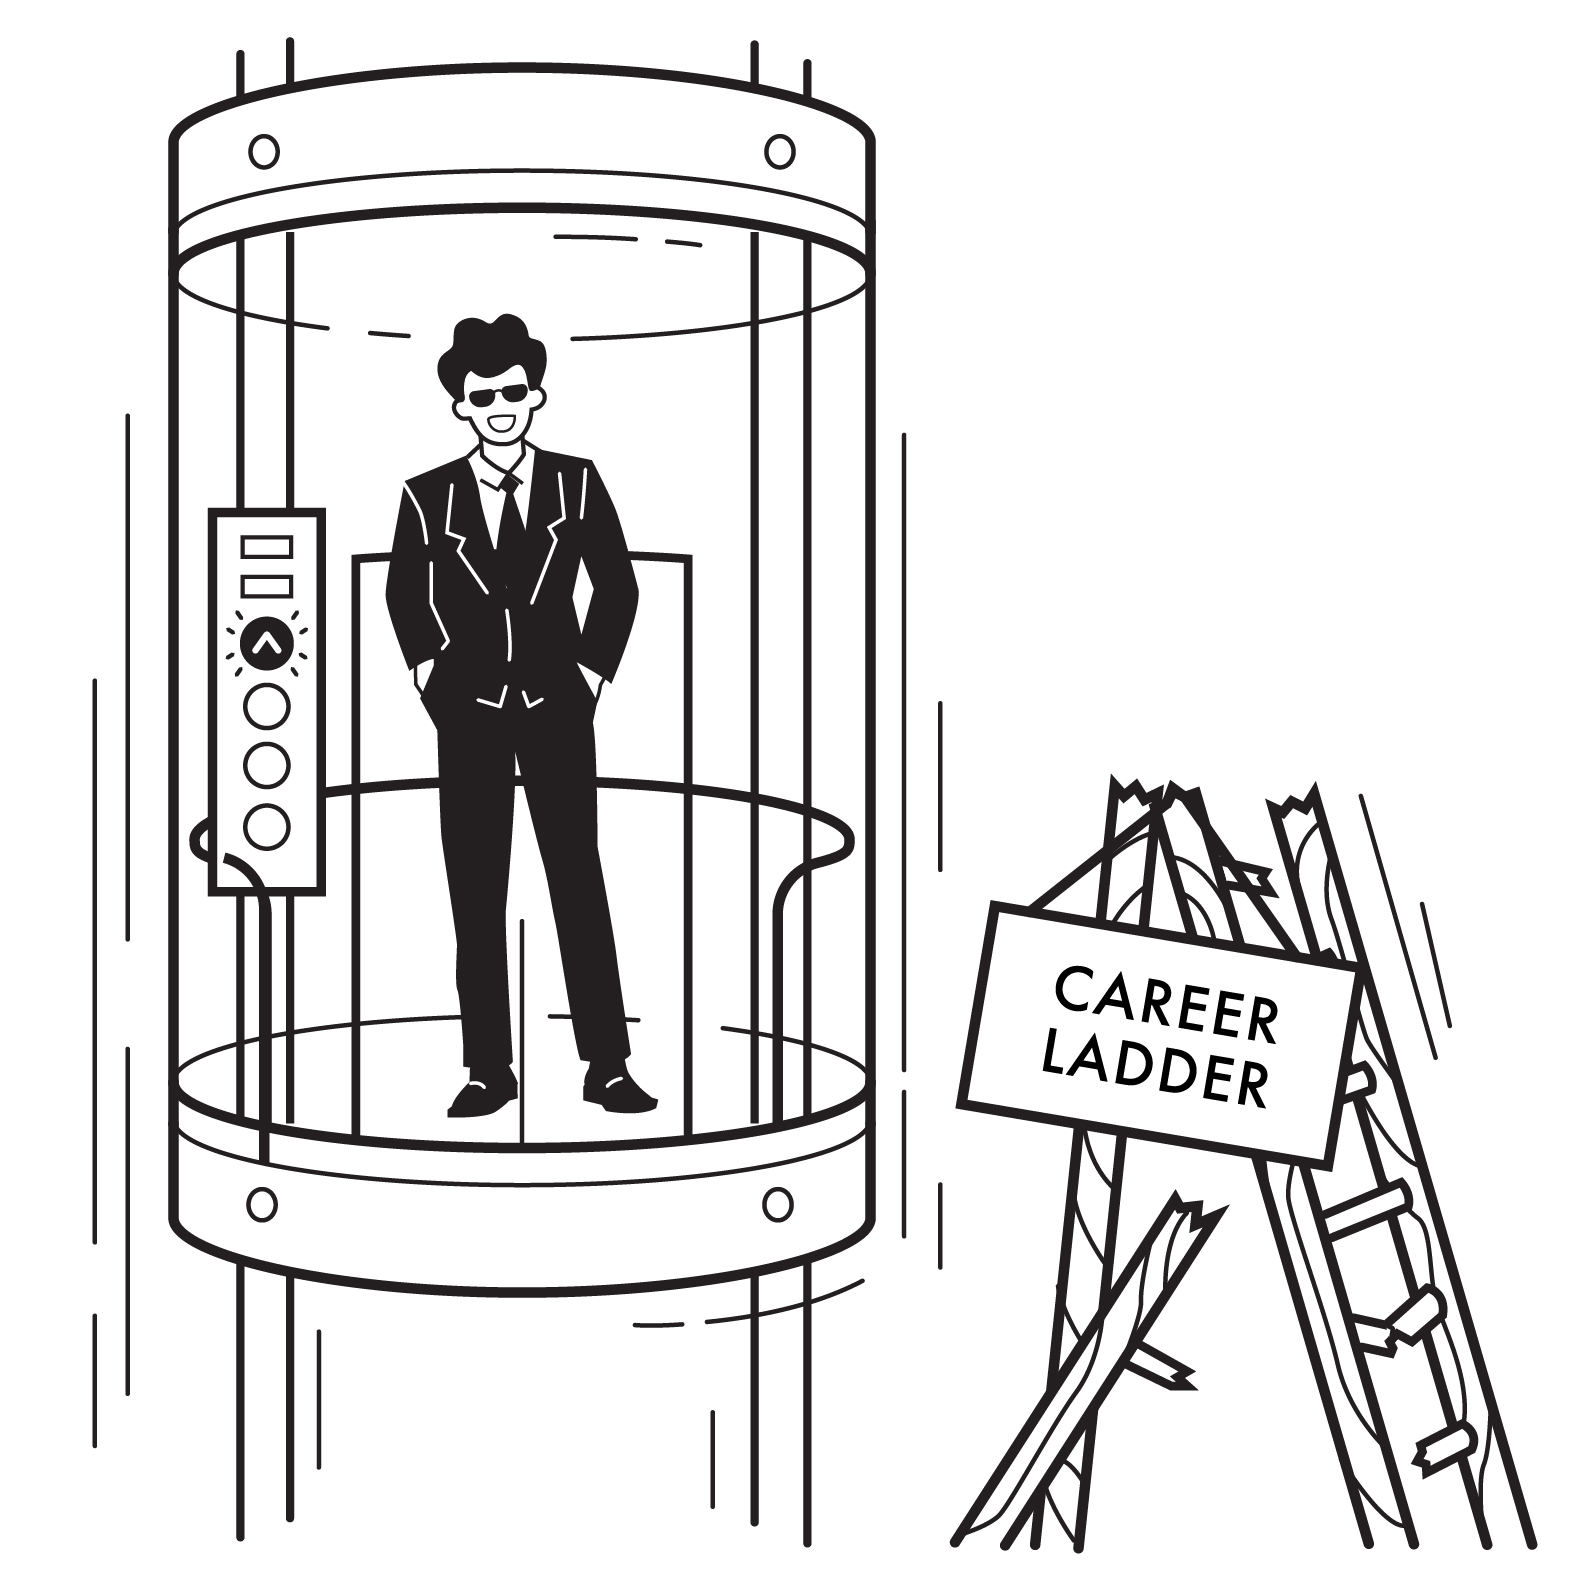 Rise up the career ladder